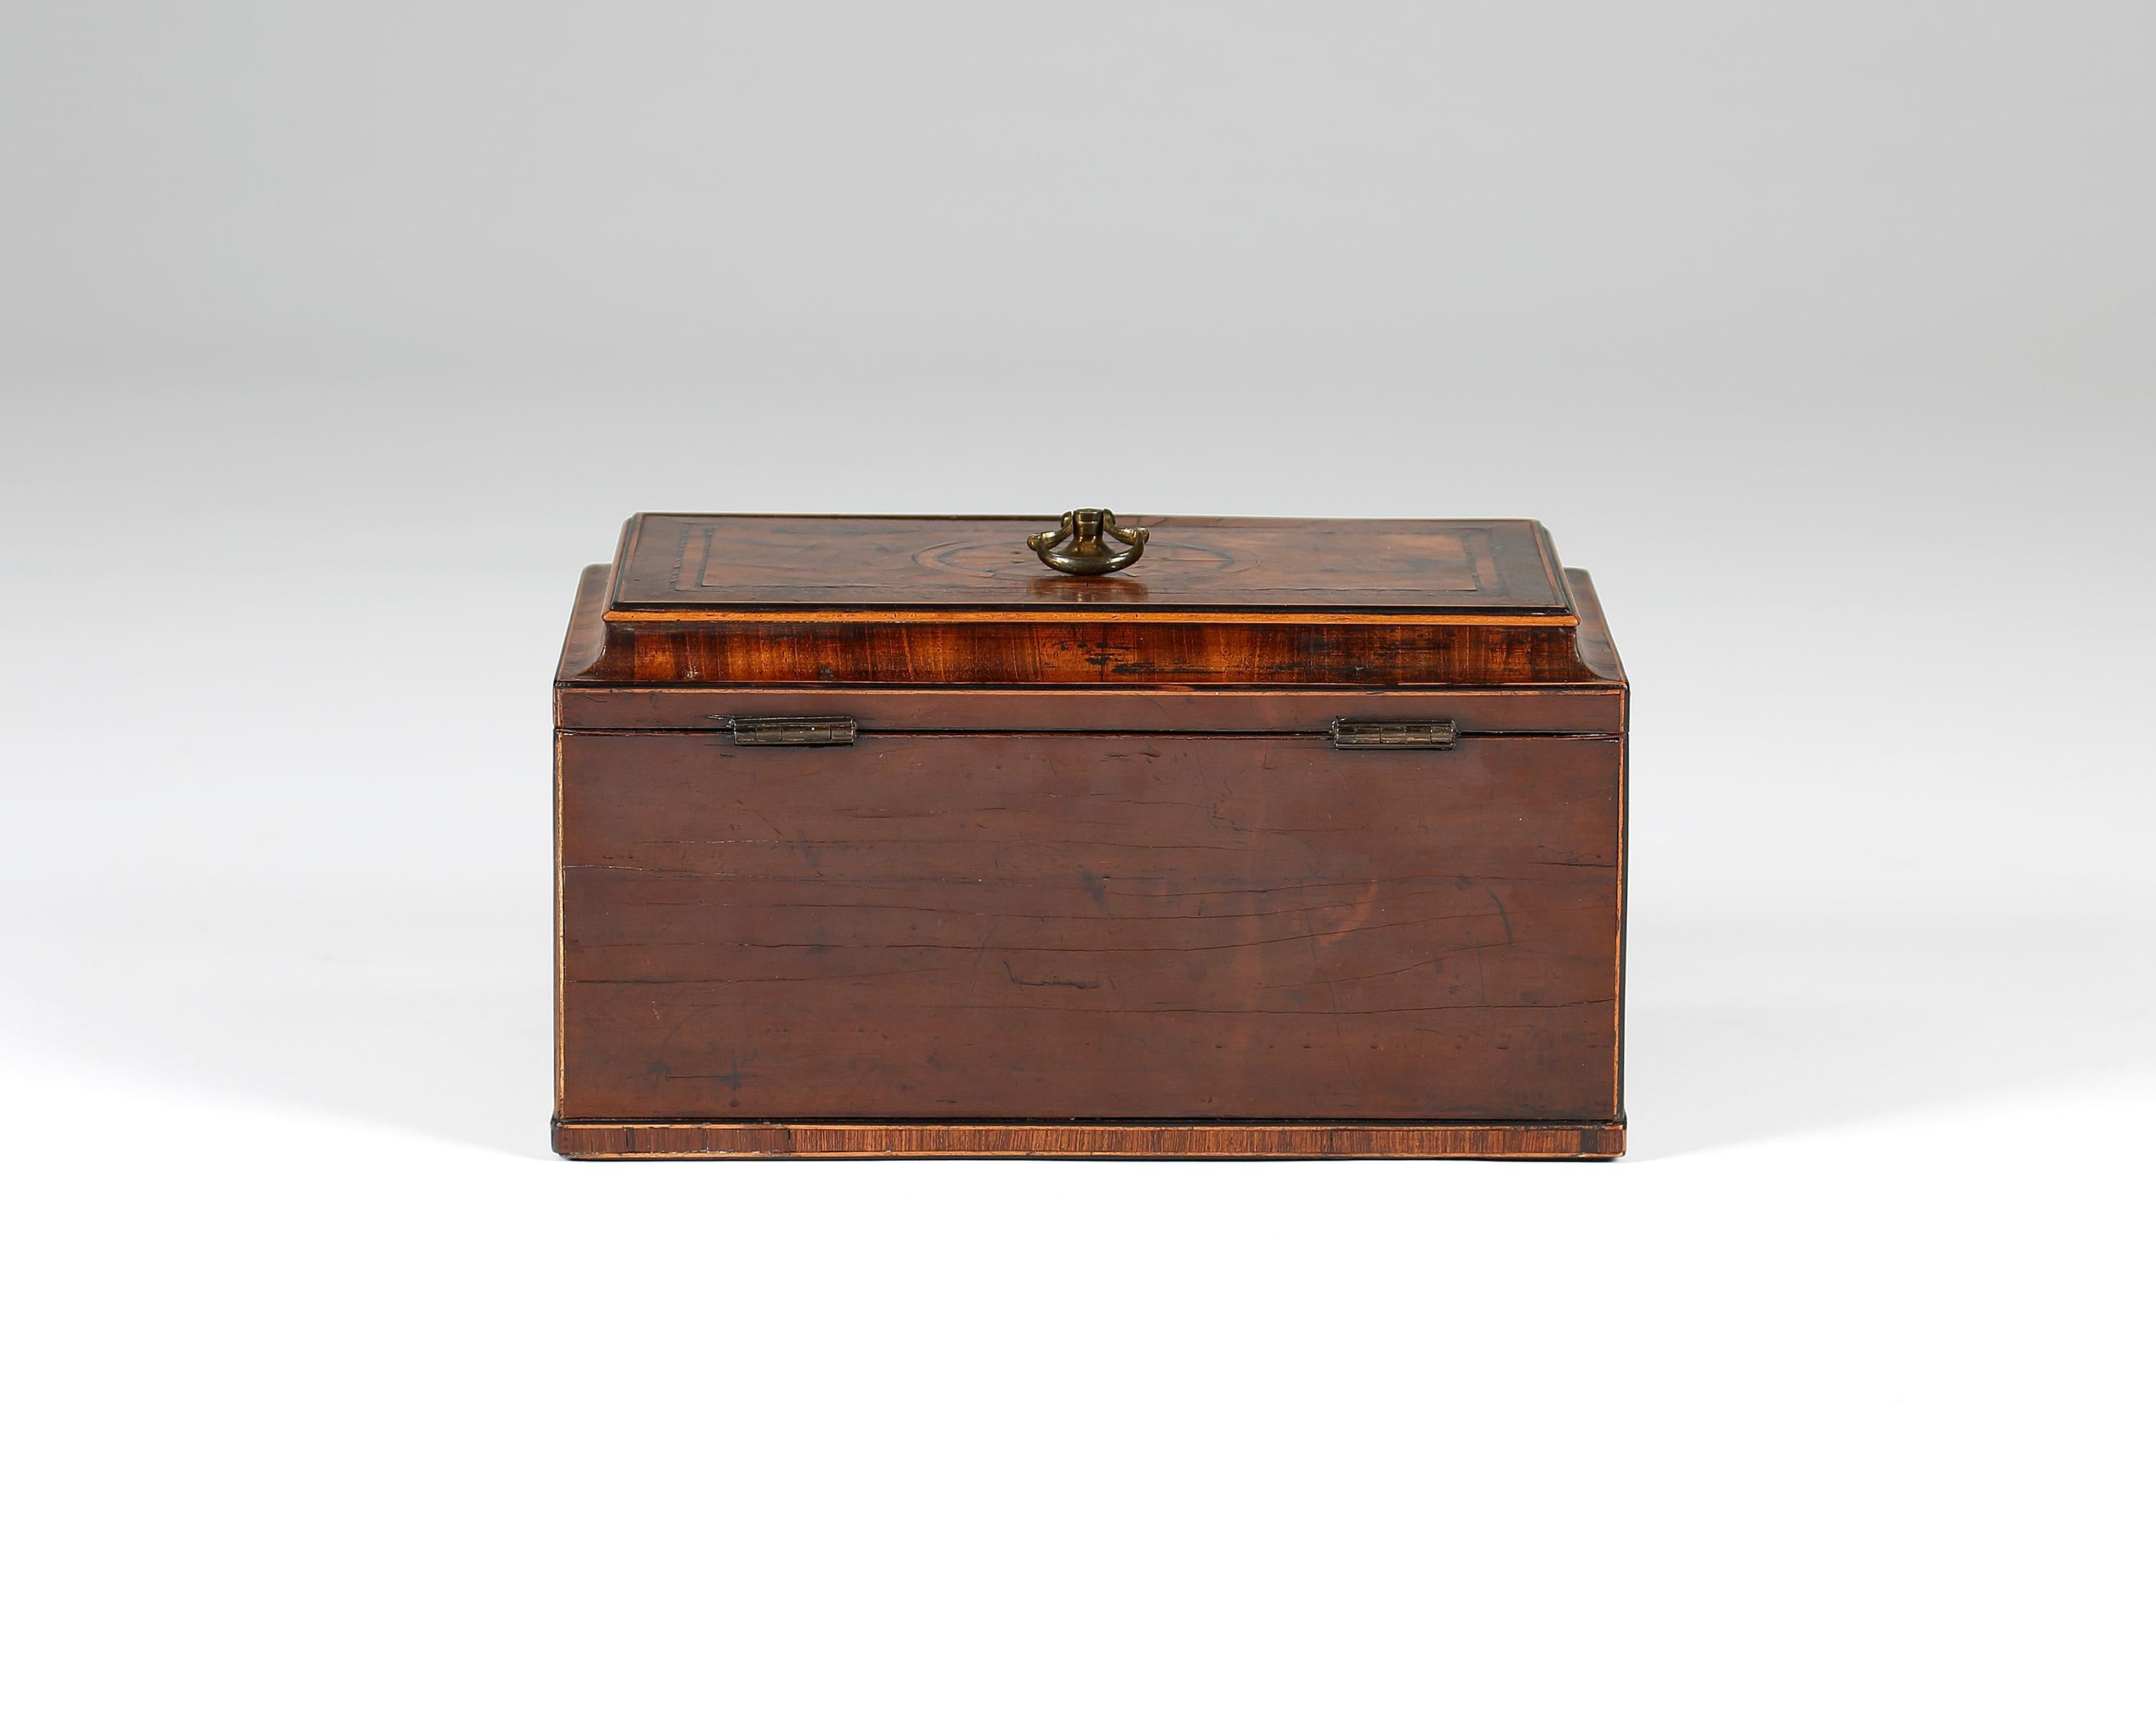 Veneer 18th Century Chippendale period Tea Caddy or chest